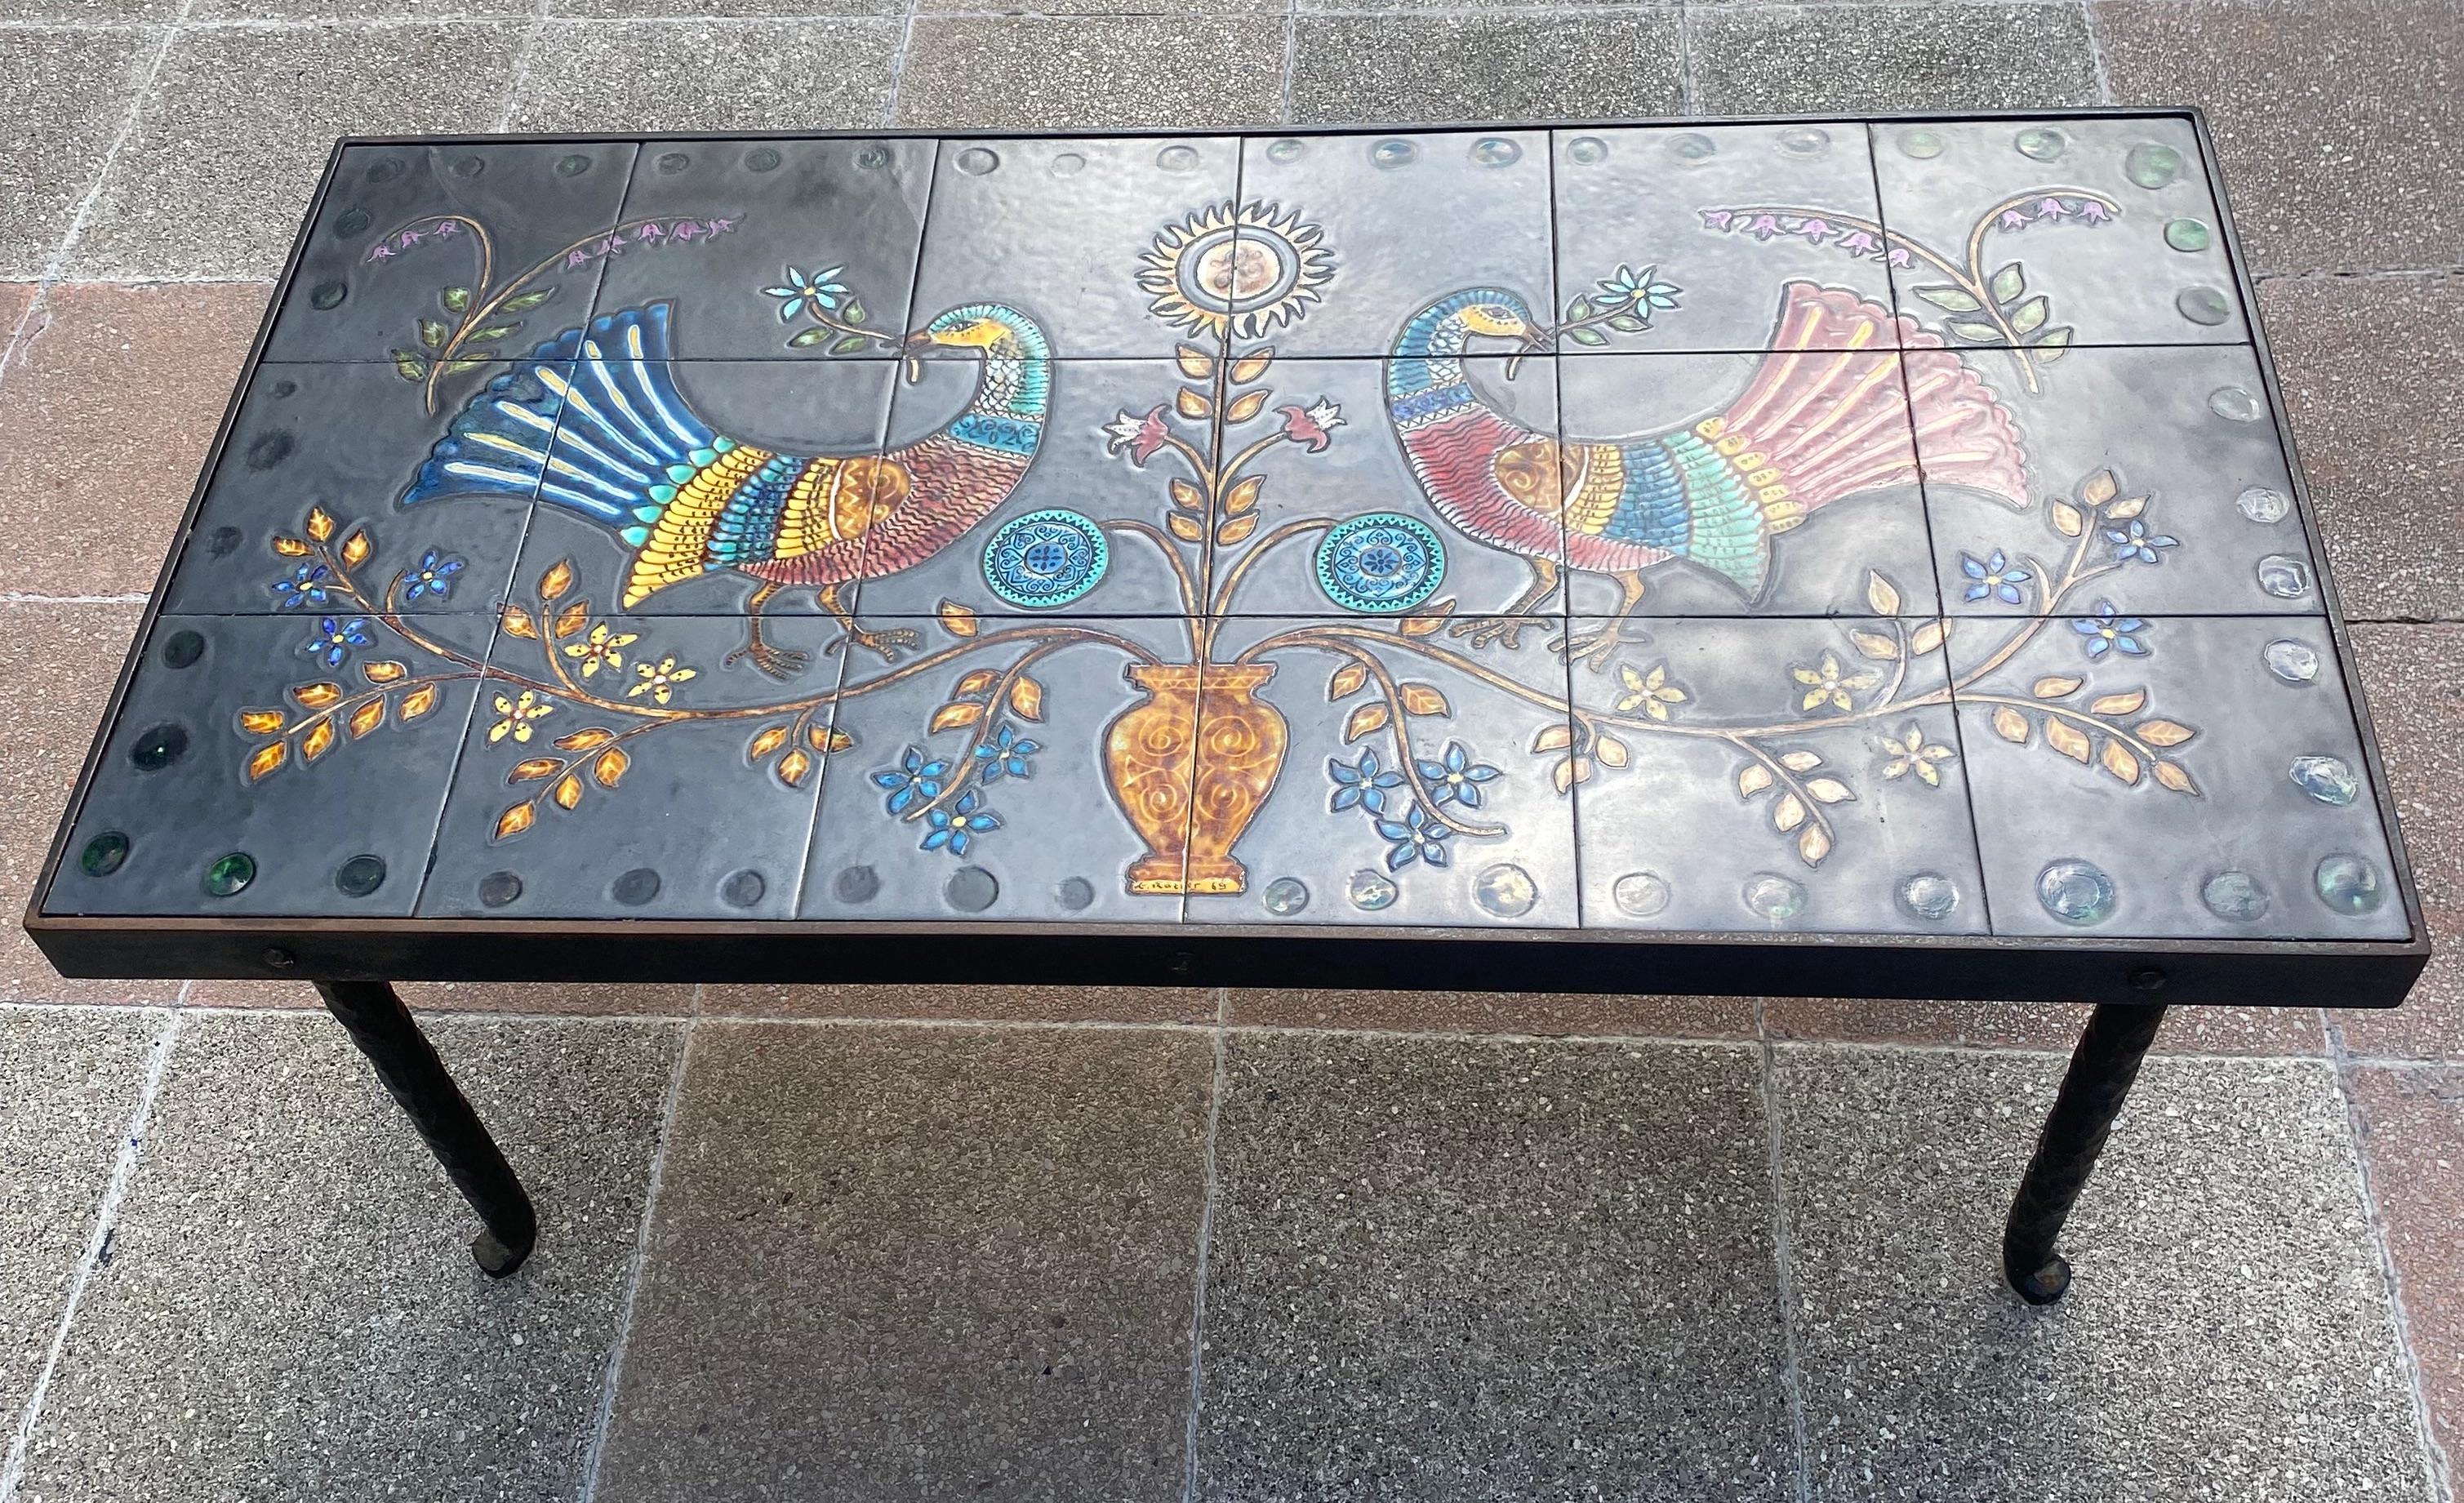 Émile Rocher
Wrought iron and ceramic coffee table with birds
signed and dated 1969
L93x W48 x H43 cms
Beautiful ceramic colours.